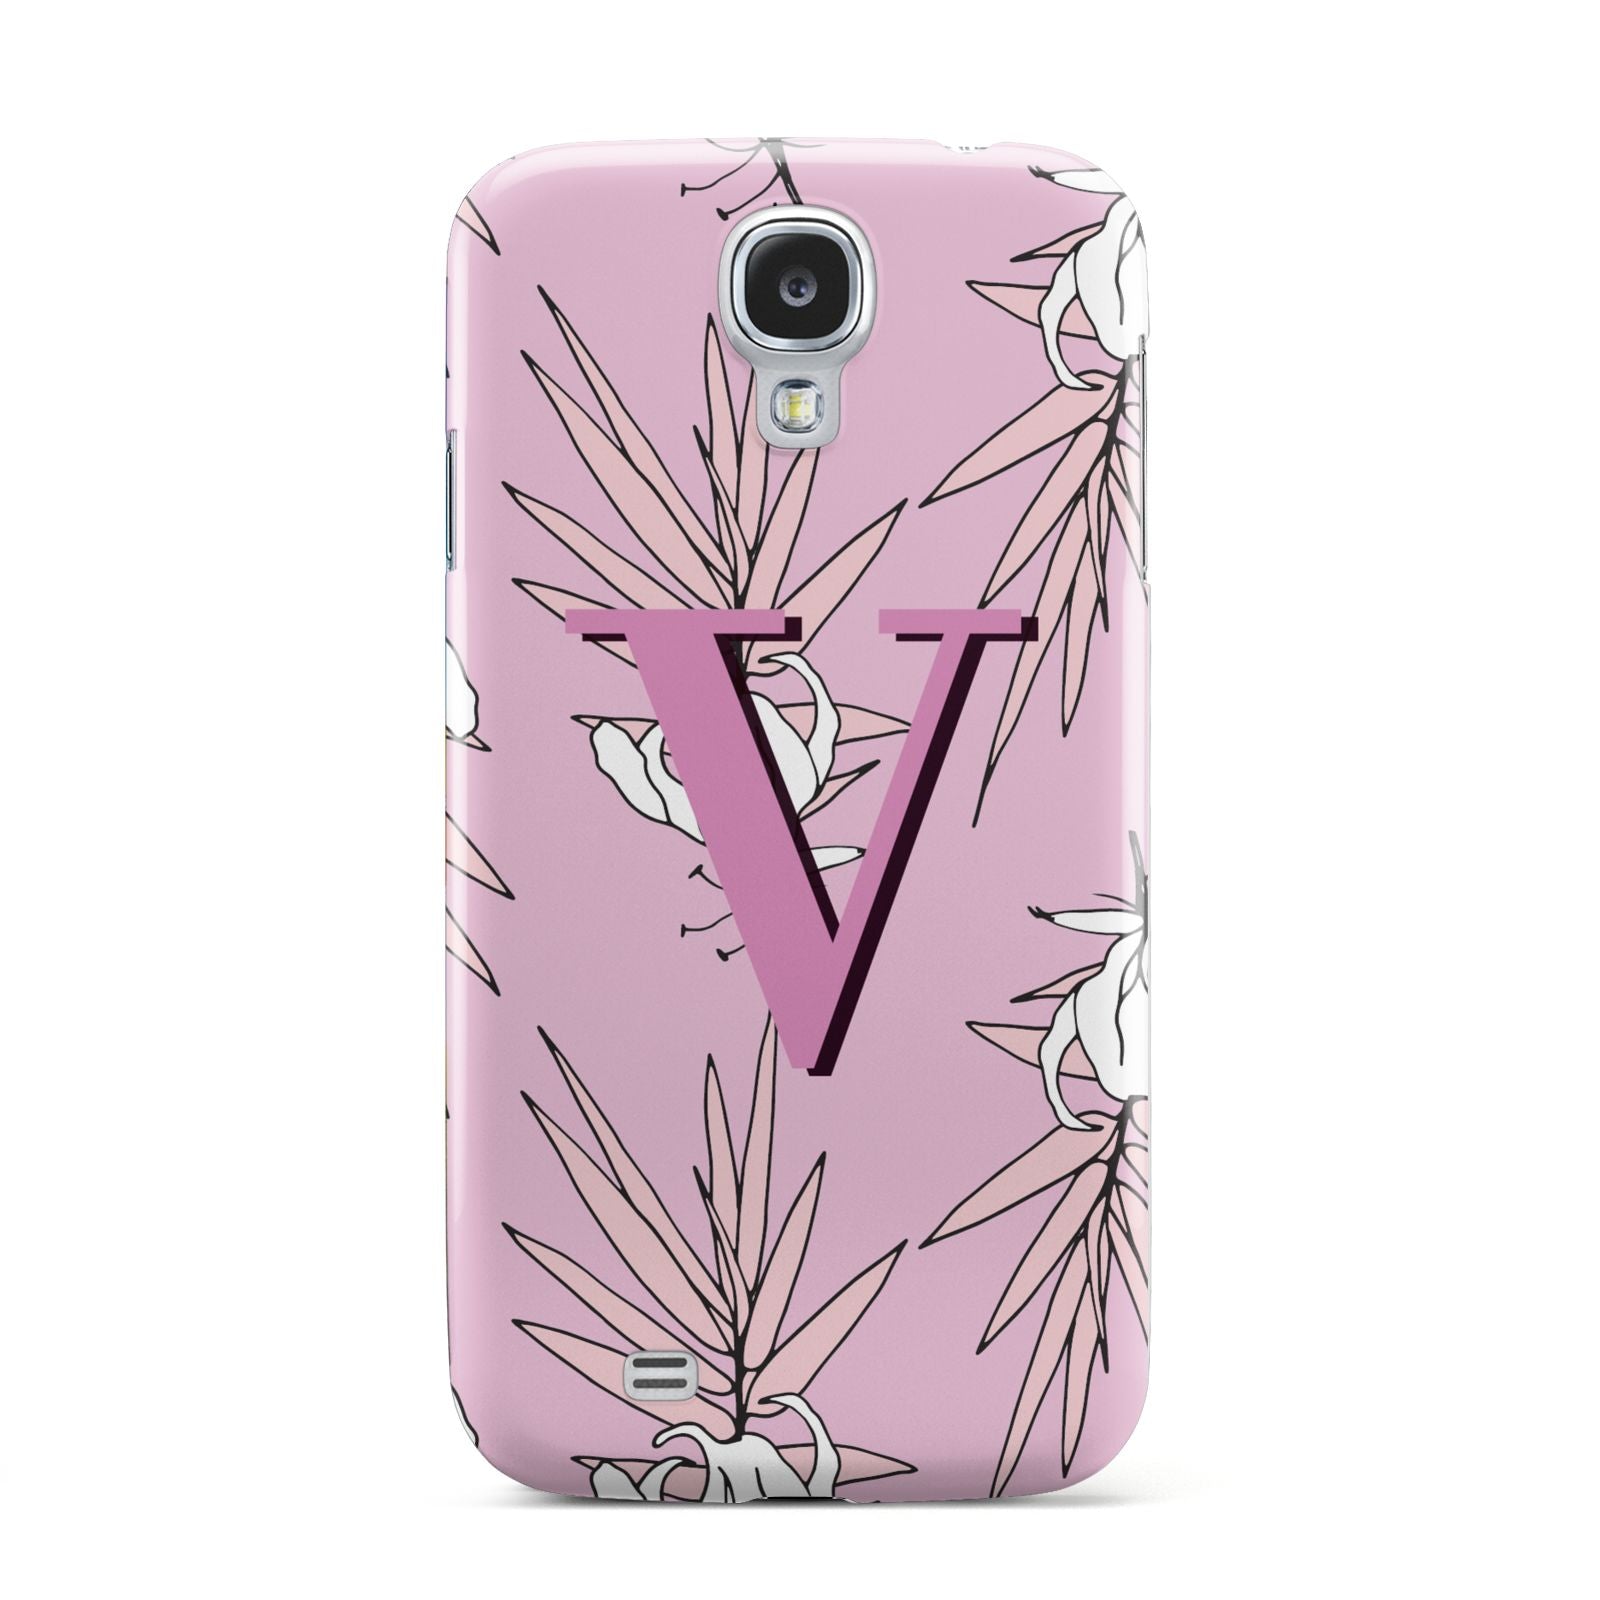 Personalised Pink and White Floral Monogram Samsung Galaxy S4 Case